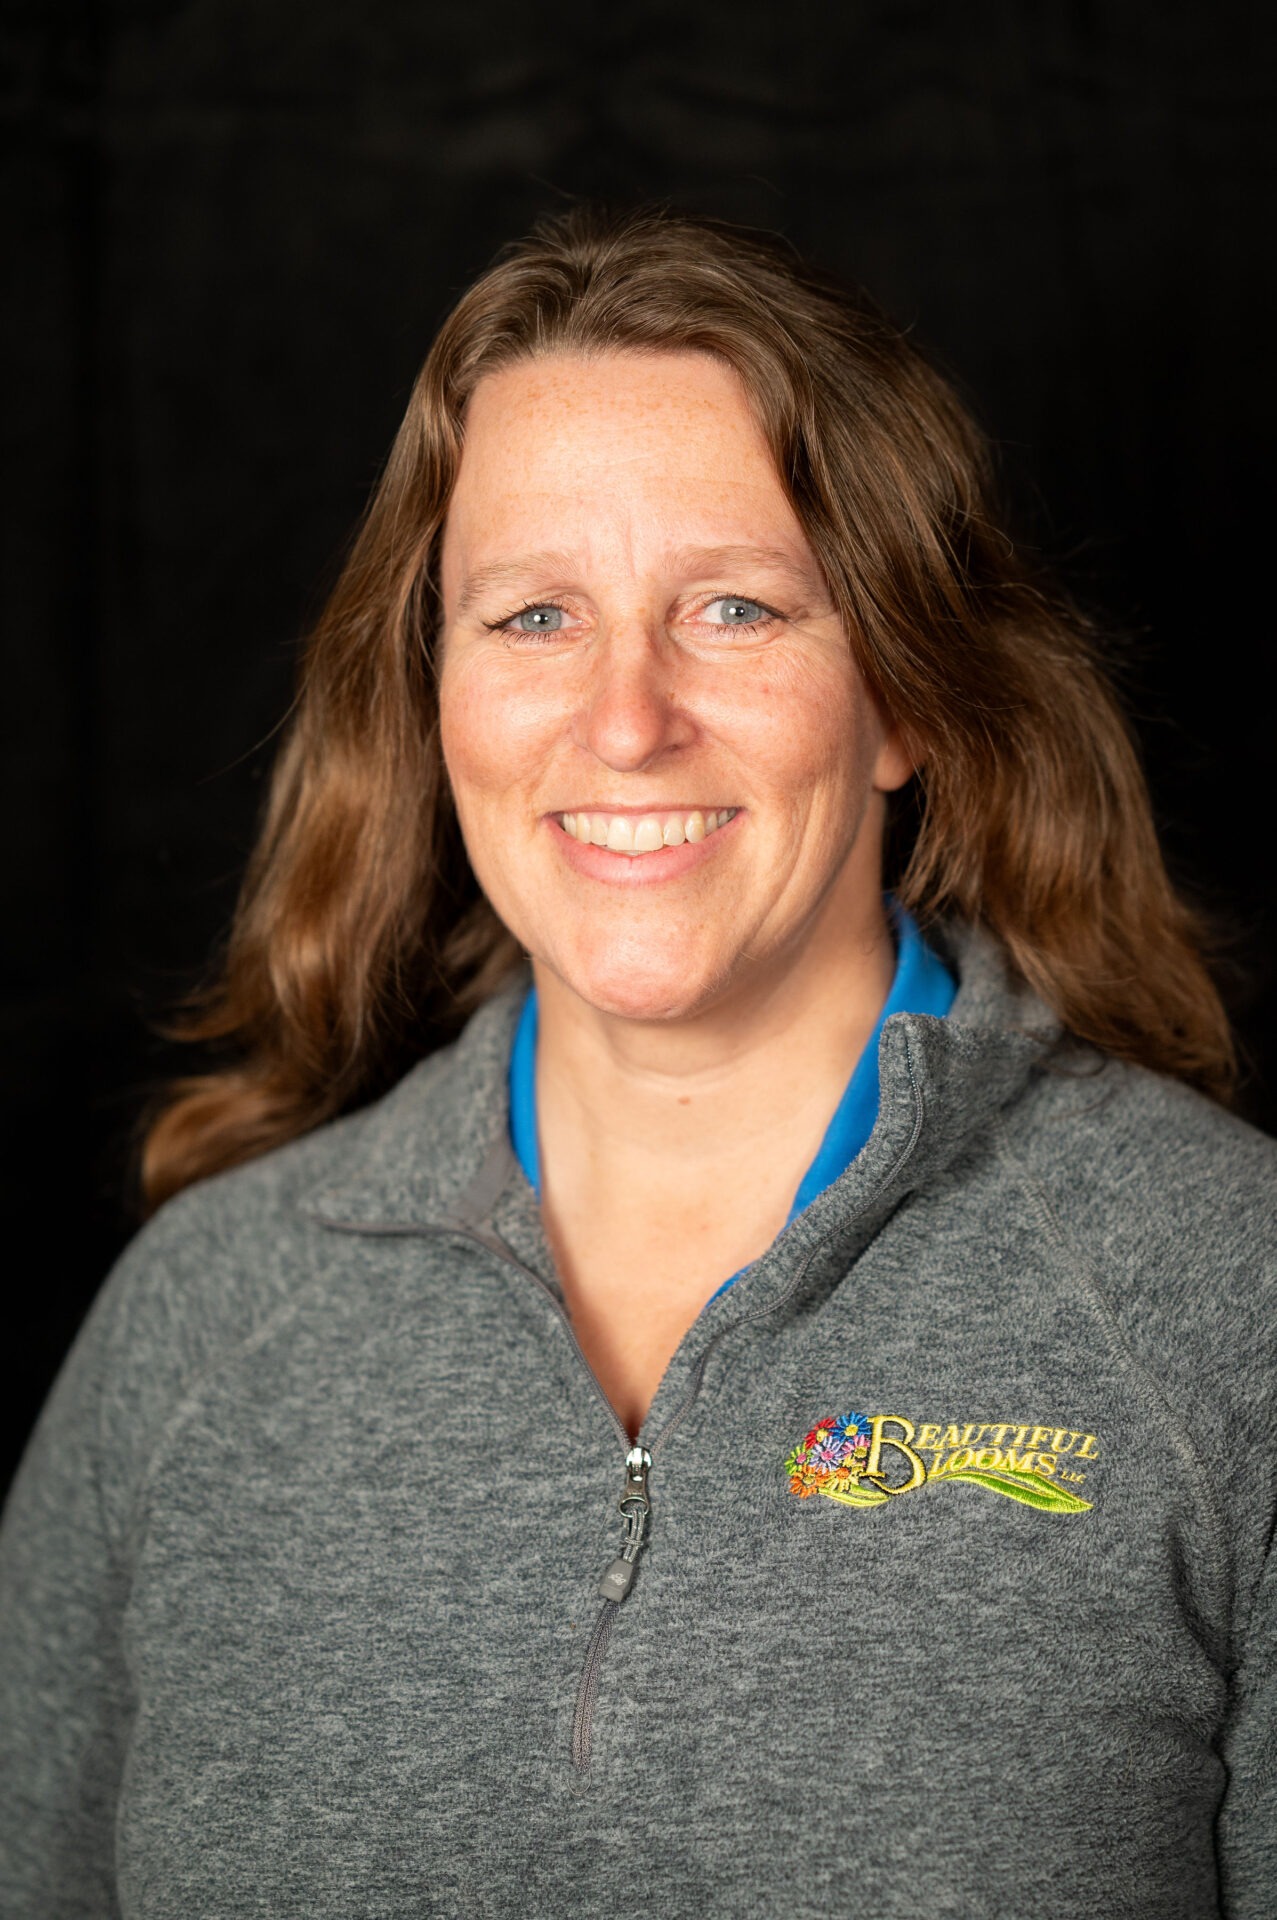 A smiling person is photographed against a black background. They are wearing a zipped grey fleece with an embroidered logo "Beautiful Blooms."